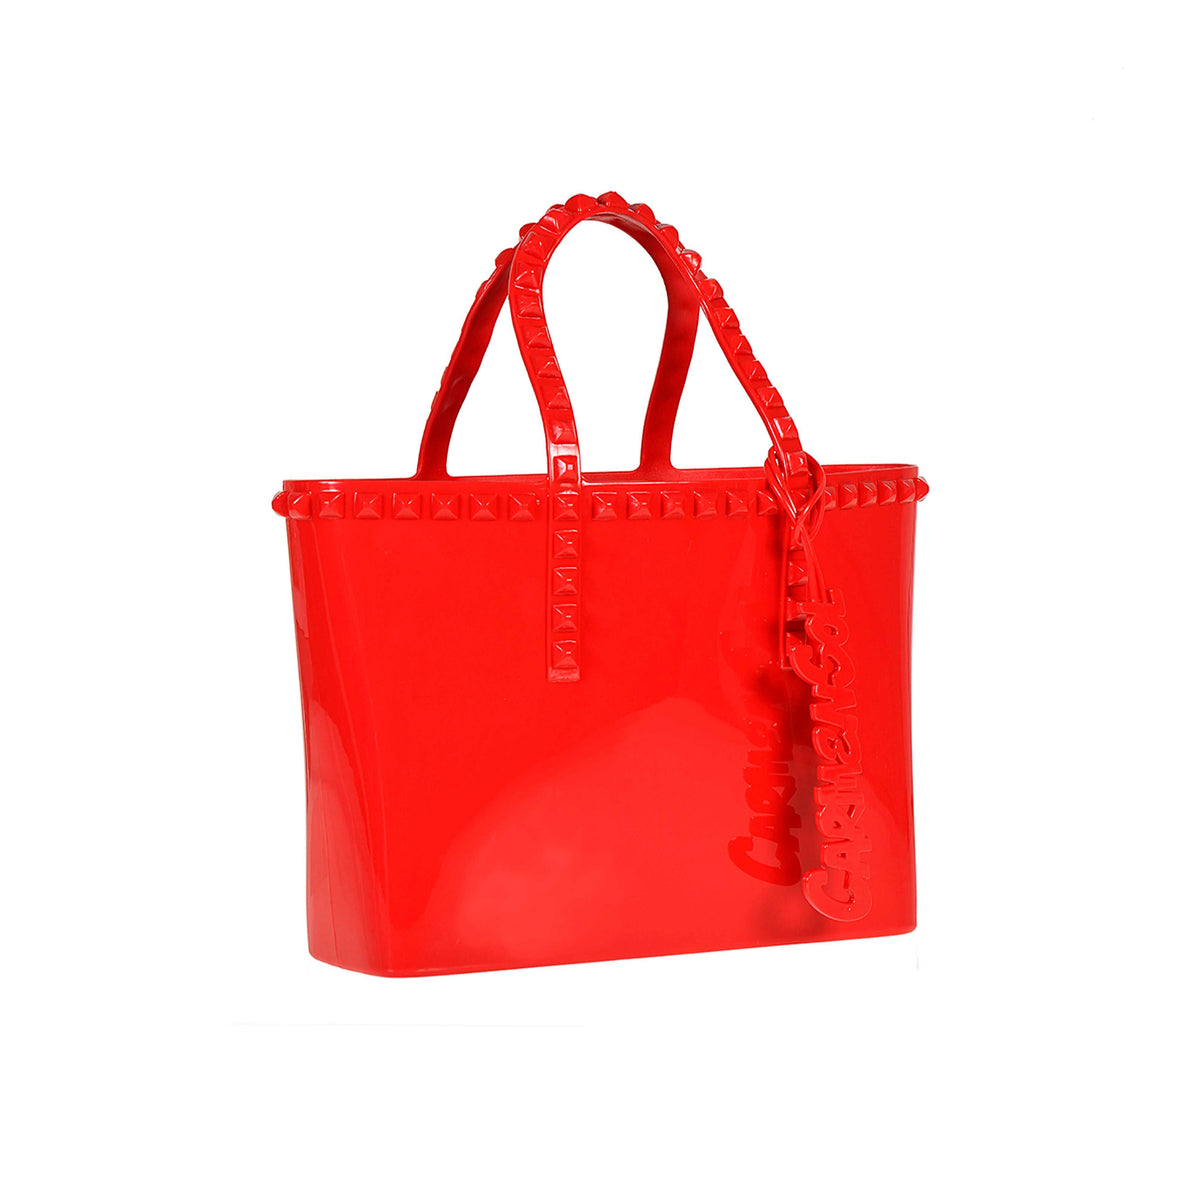 Made in Italy jelly beach tote bags from Carmen Sol